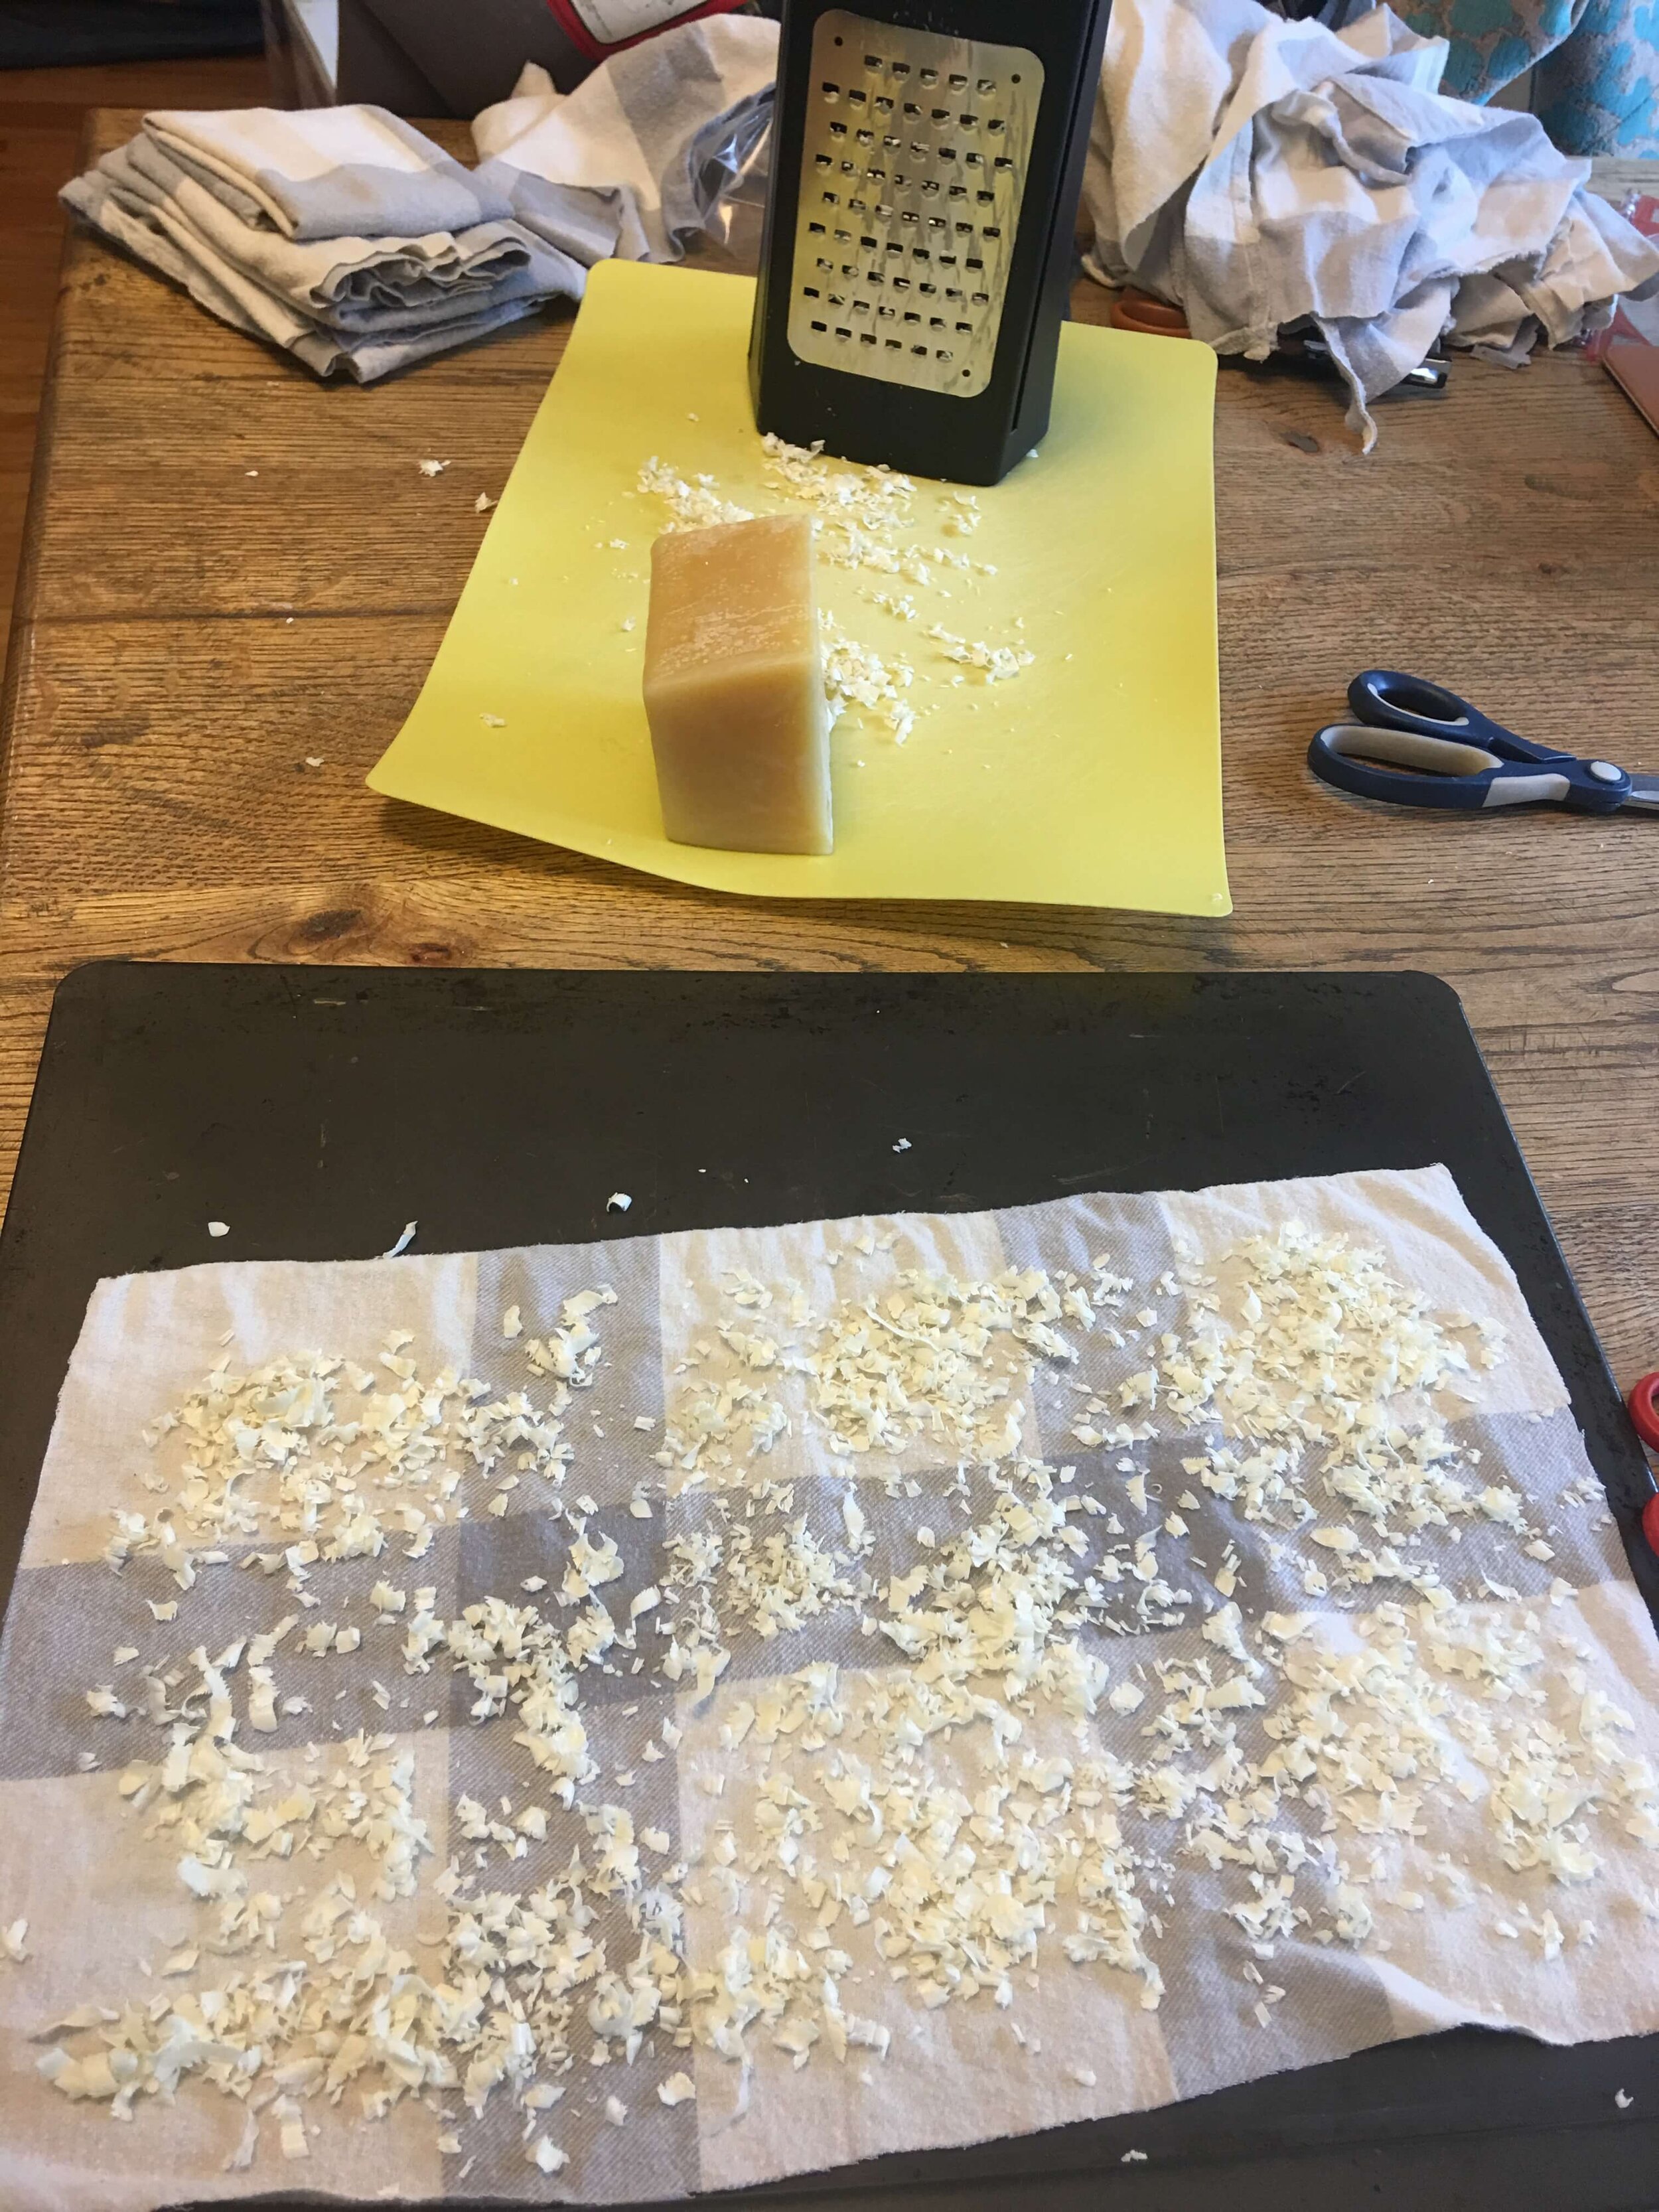 Making Beeswax Wraps